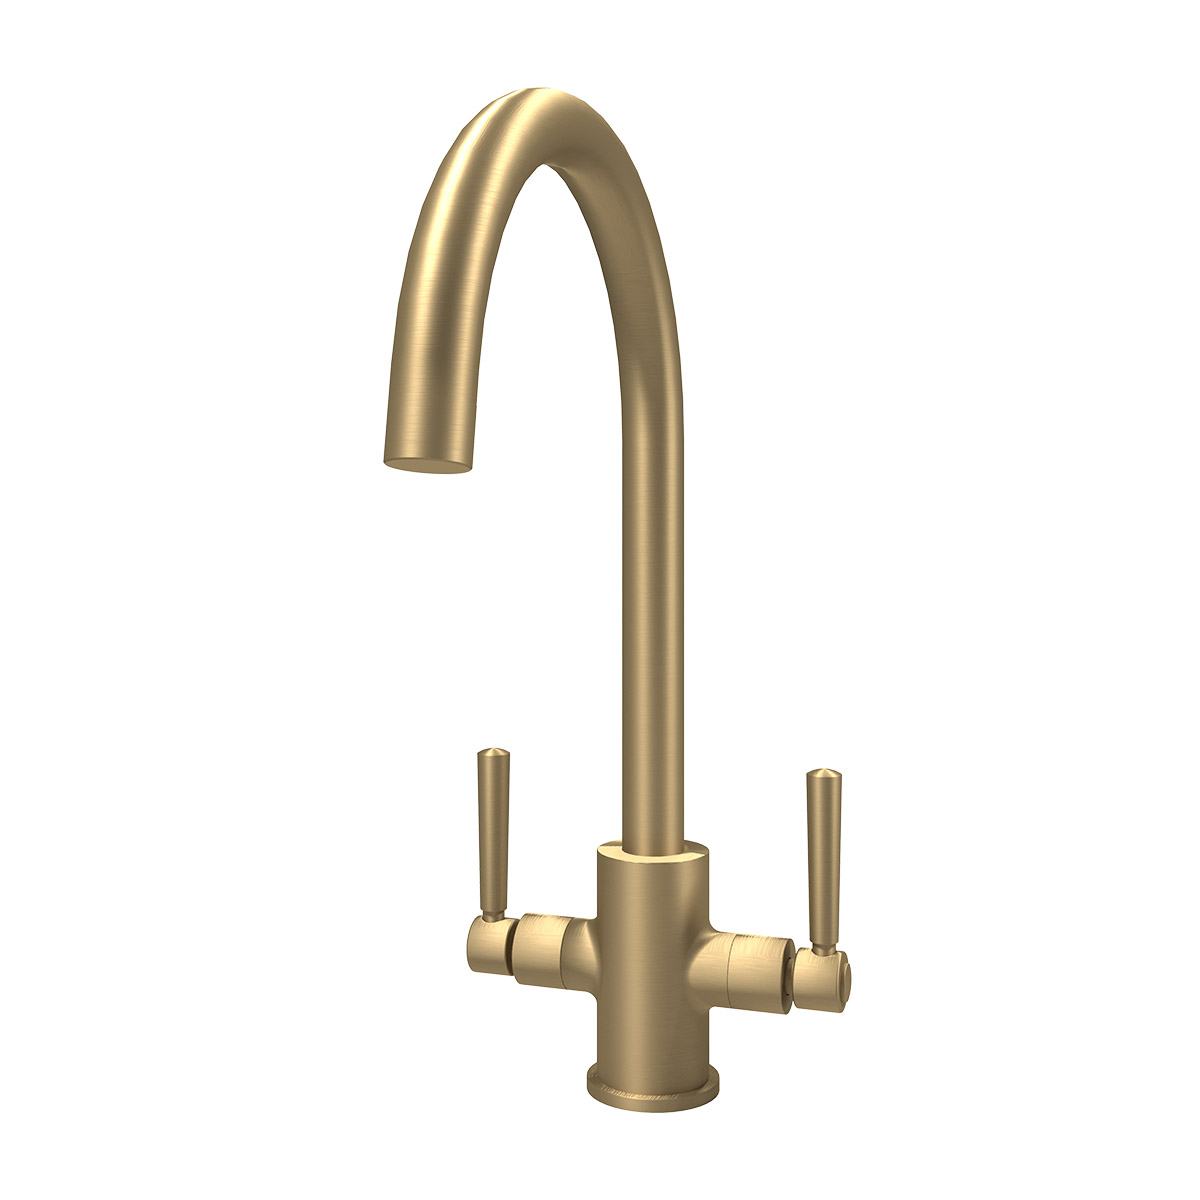 Noa dual lever kitchen tap in brushed brass